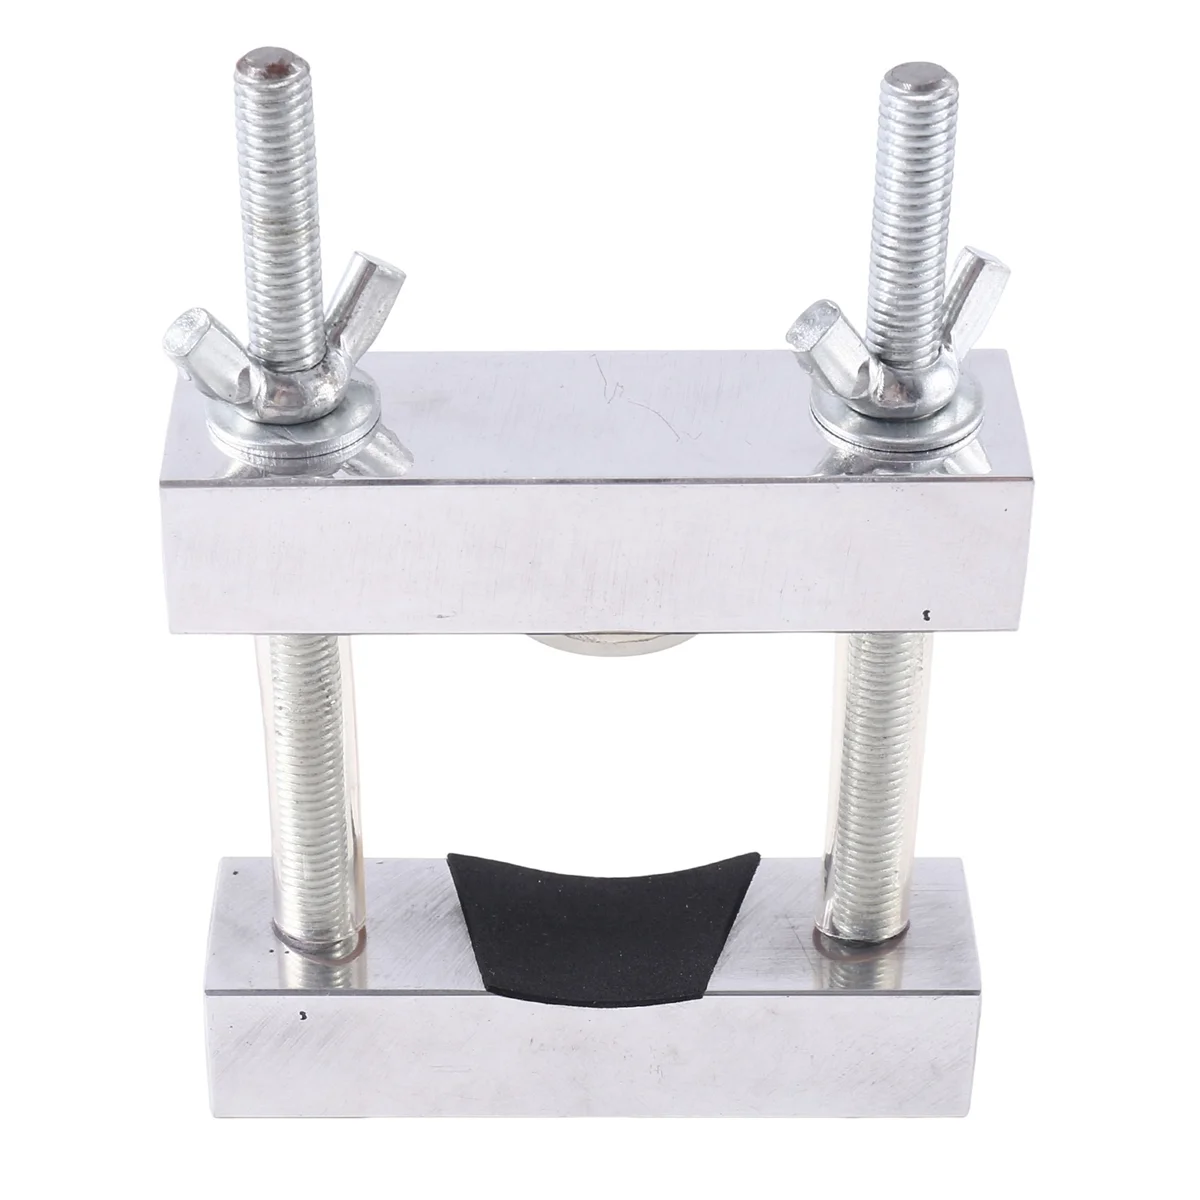 

Violin Neck Install Clamp Easy Head Clamp Making Violin Tools Solid Tuner Alloy Head Fixture